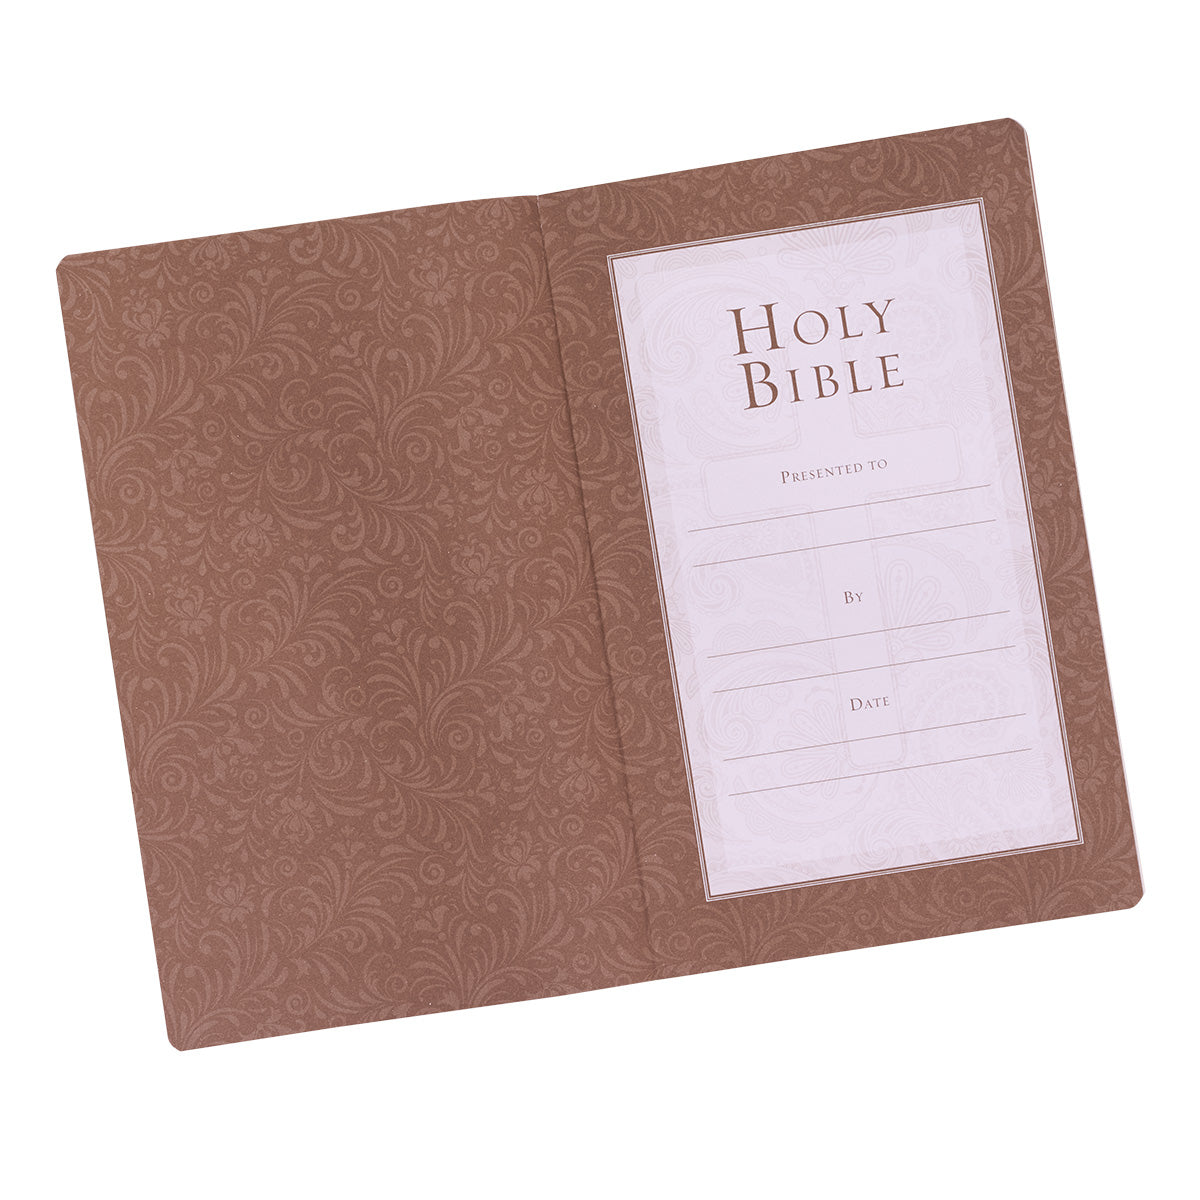 Tan Faux Leather Softcover King James Version Gift and Award Bible - The Christian Gift Company